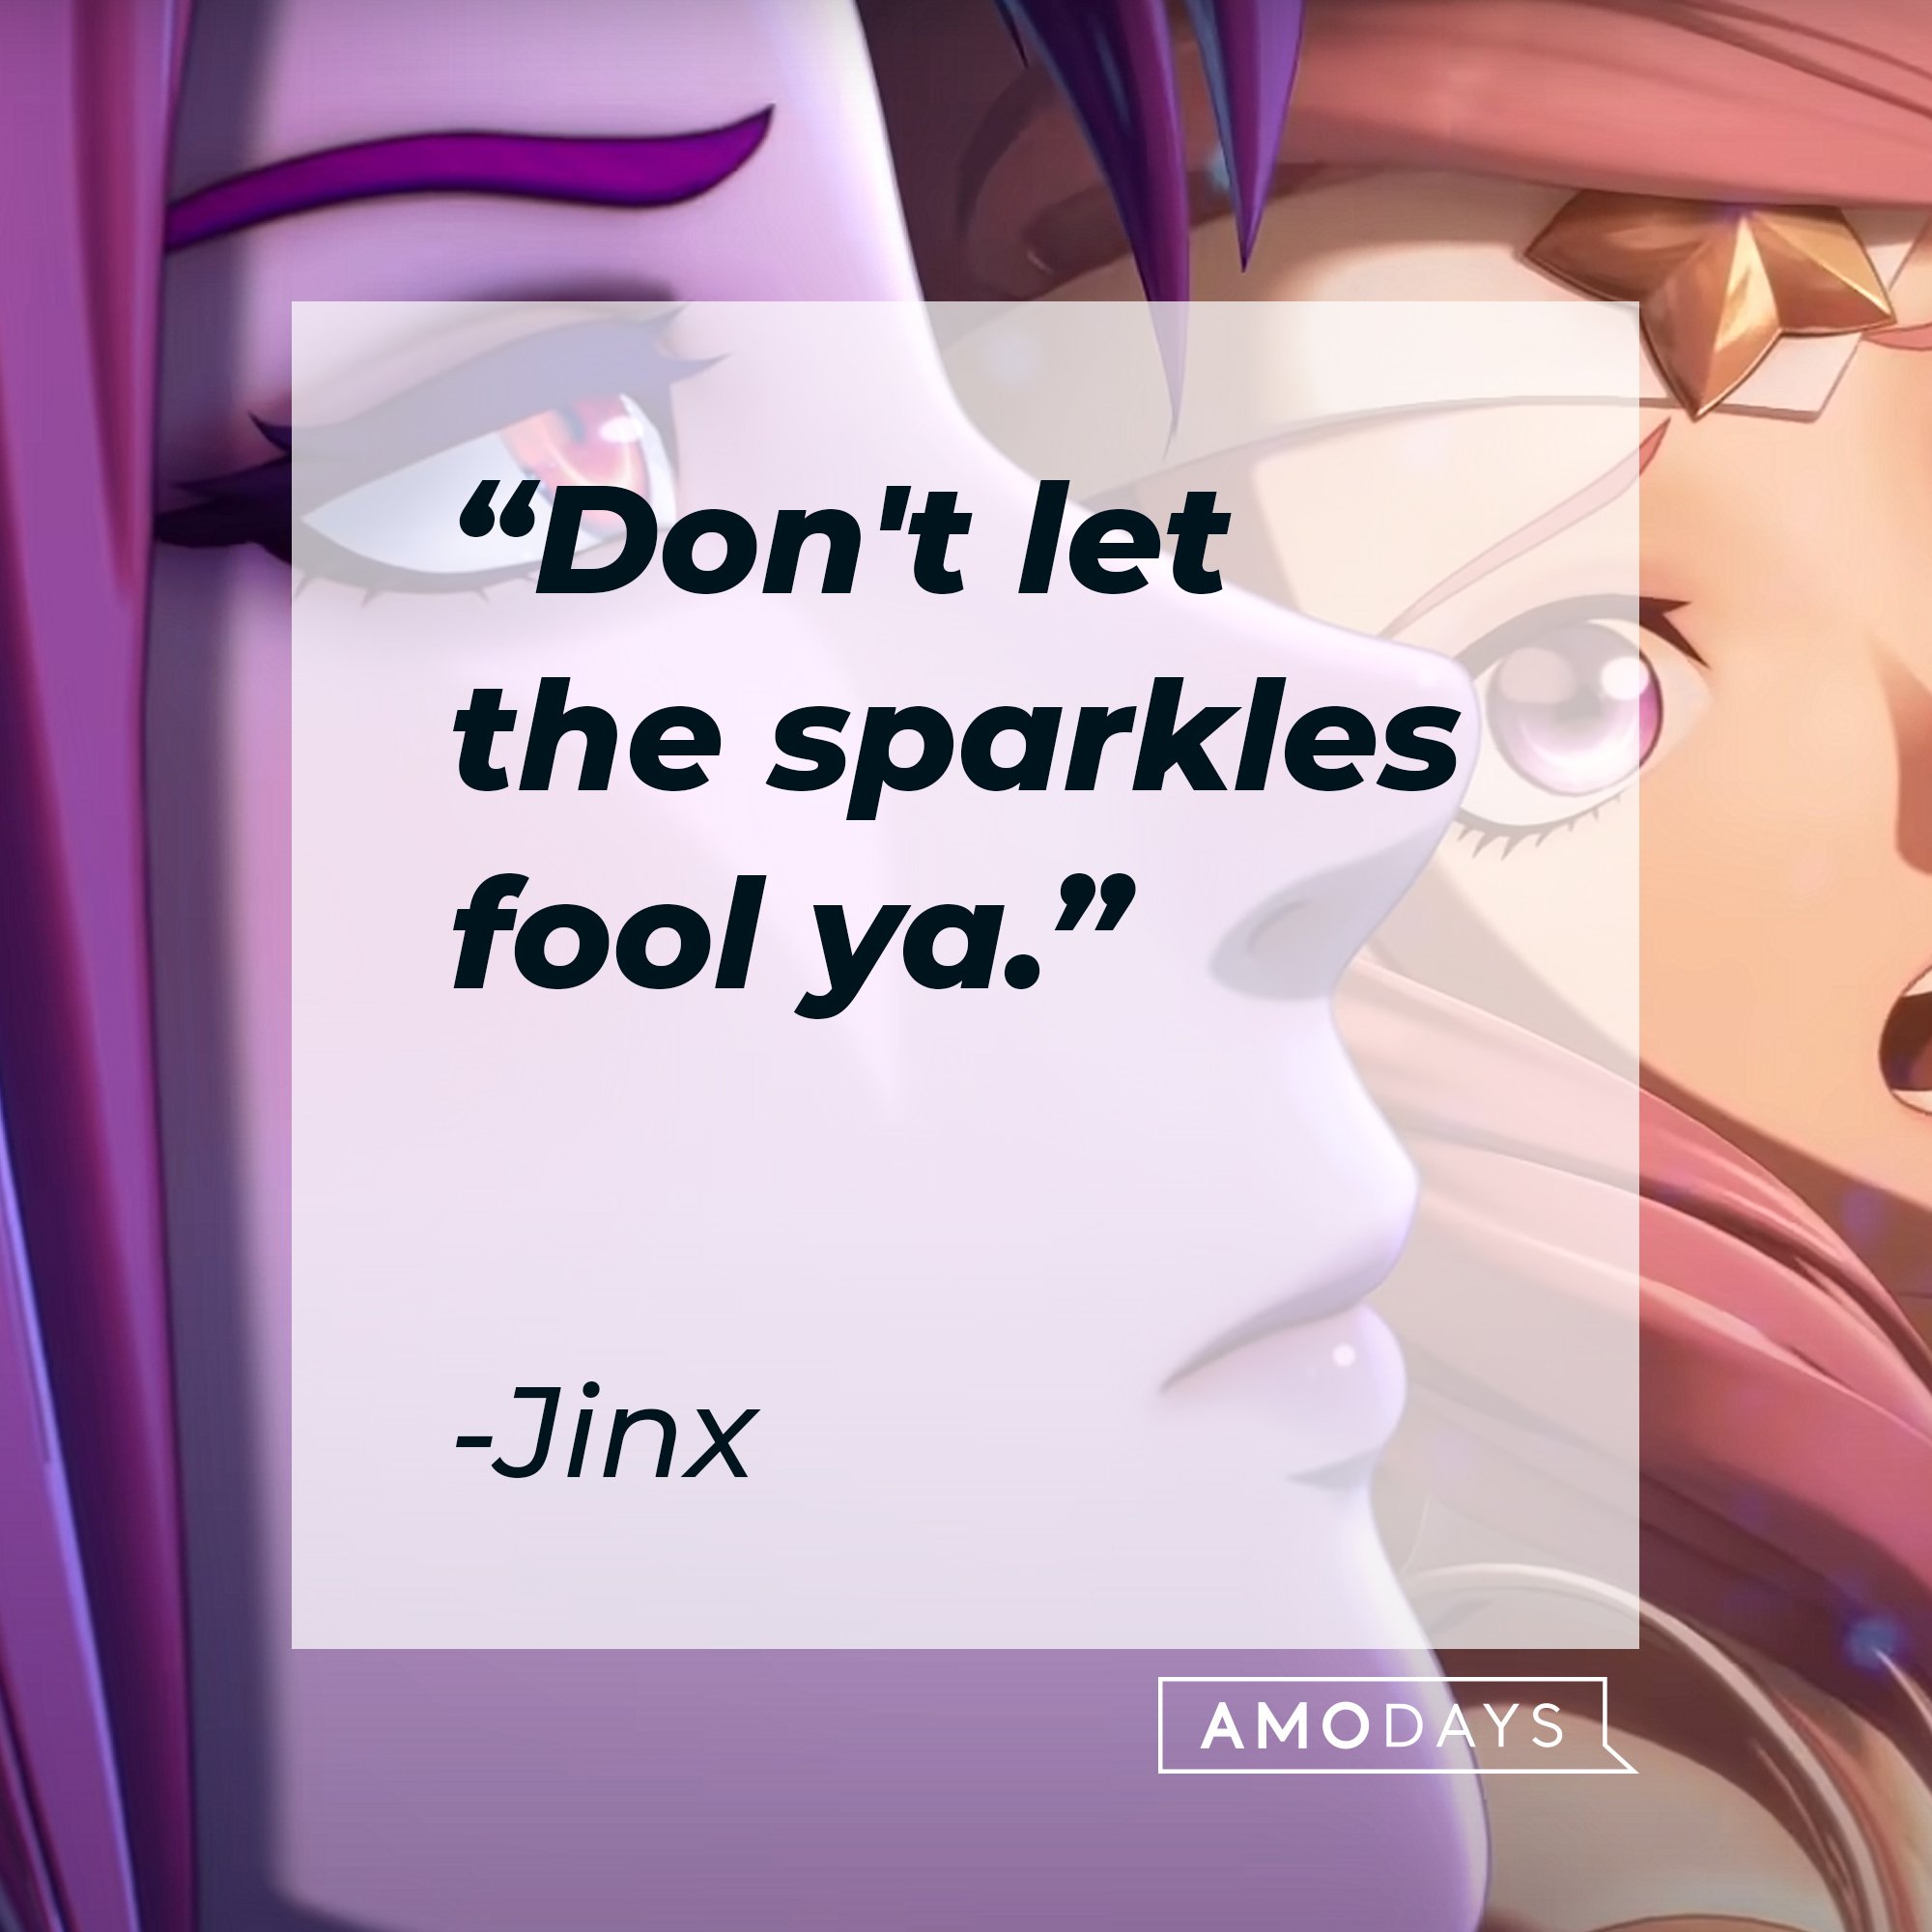 Jinx's quote: "Don't let the sparkles fool ya." | Image: AmoDays